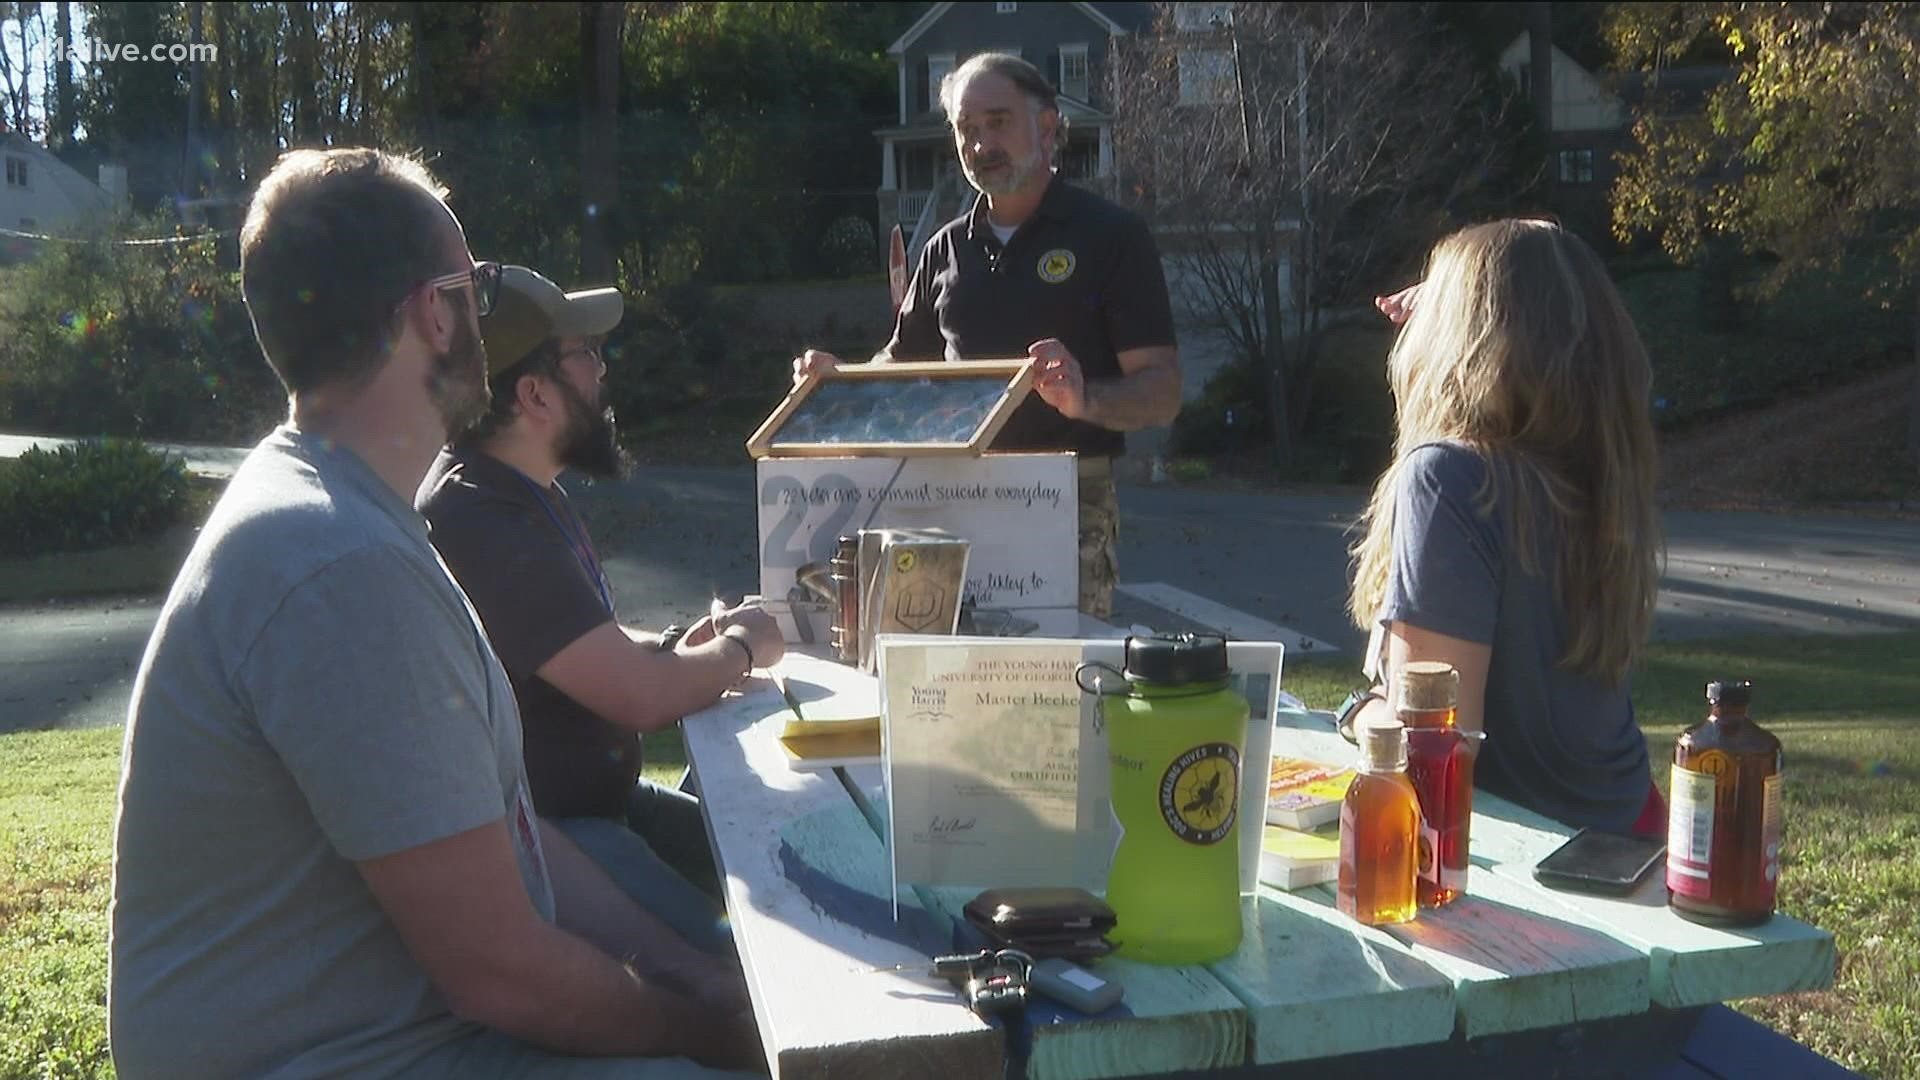 Army veteran Tim Doherty is using his love of beekeeping to help others suffering from PTSD and traumatic brain injury.